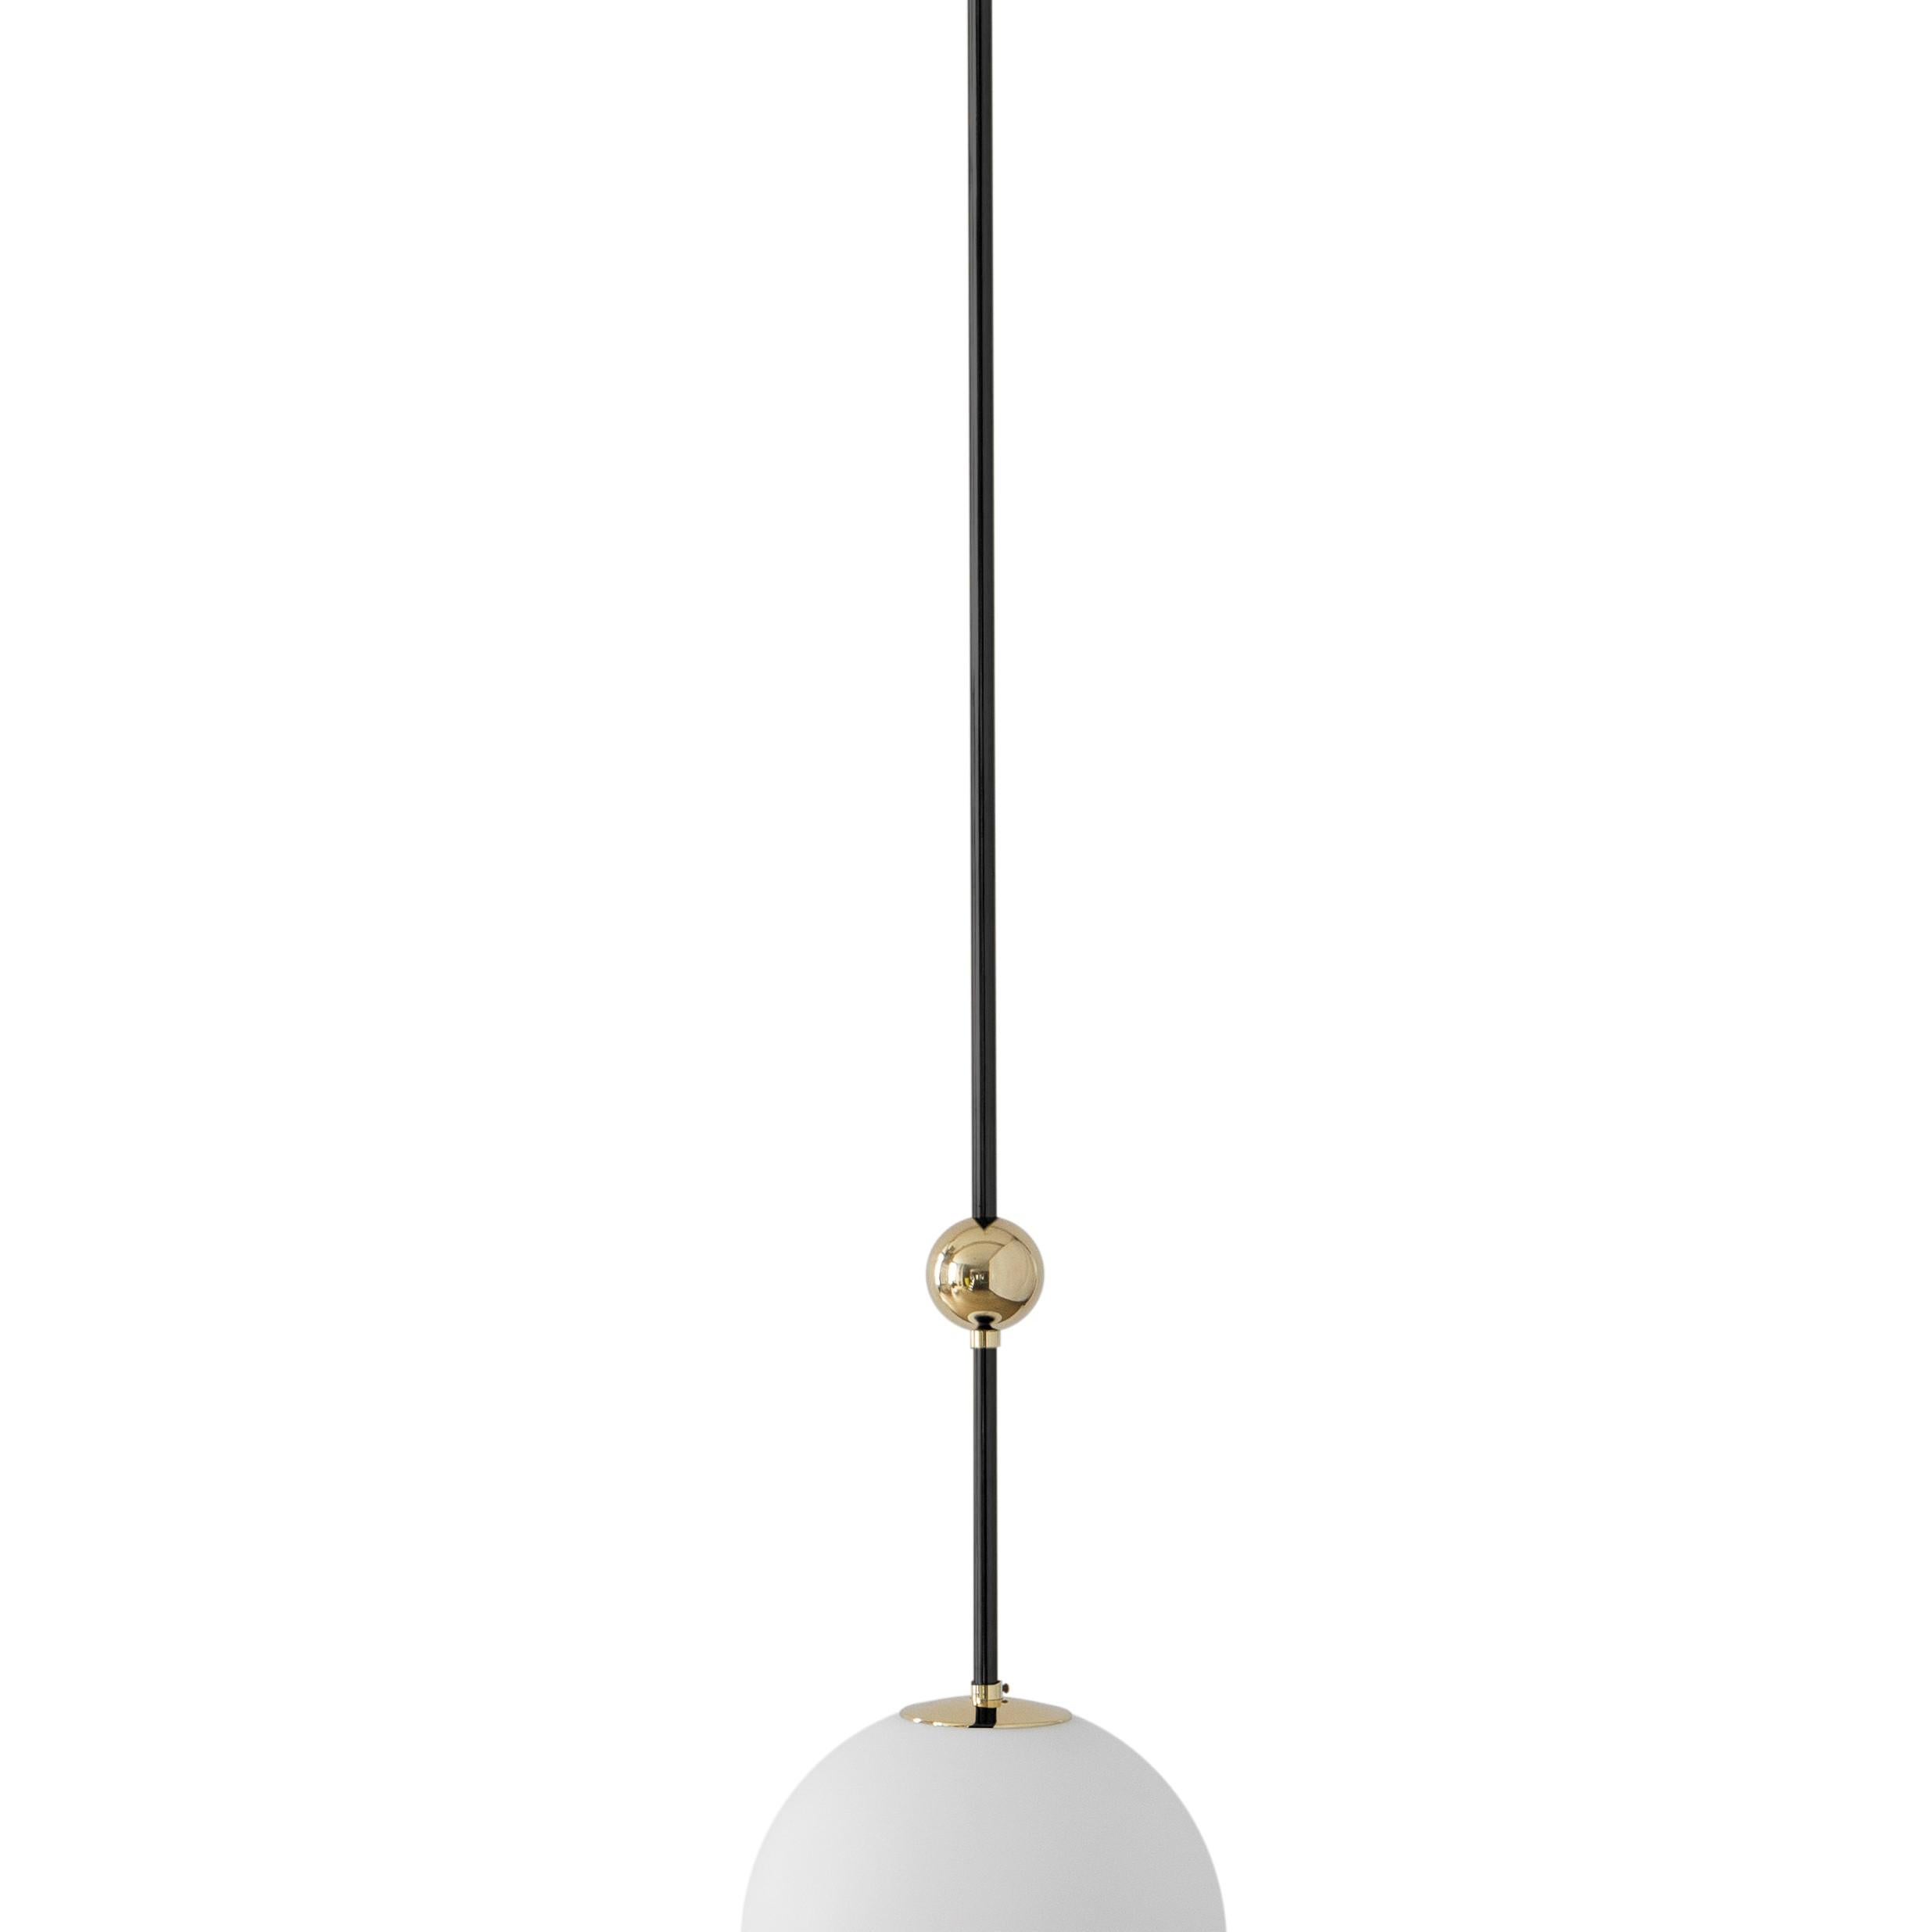 Pendant 02 black by Magic Circus Editions
Dimensions: D 25 x W 25 x H 90 cm, also available in H 110, 130, 150, 175, 190 cm
Materials: Brass, mouth blown glass

All our lamps can be wired according to each country. If sold to the USA it will be